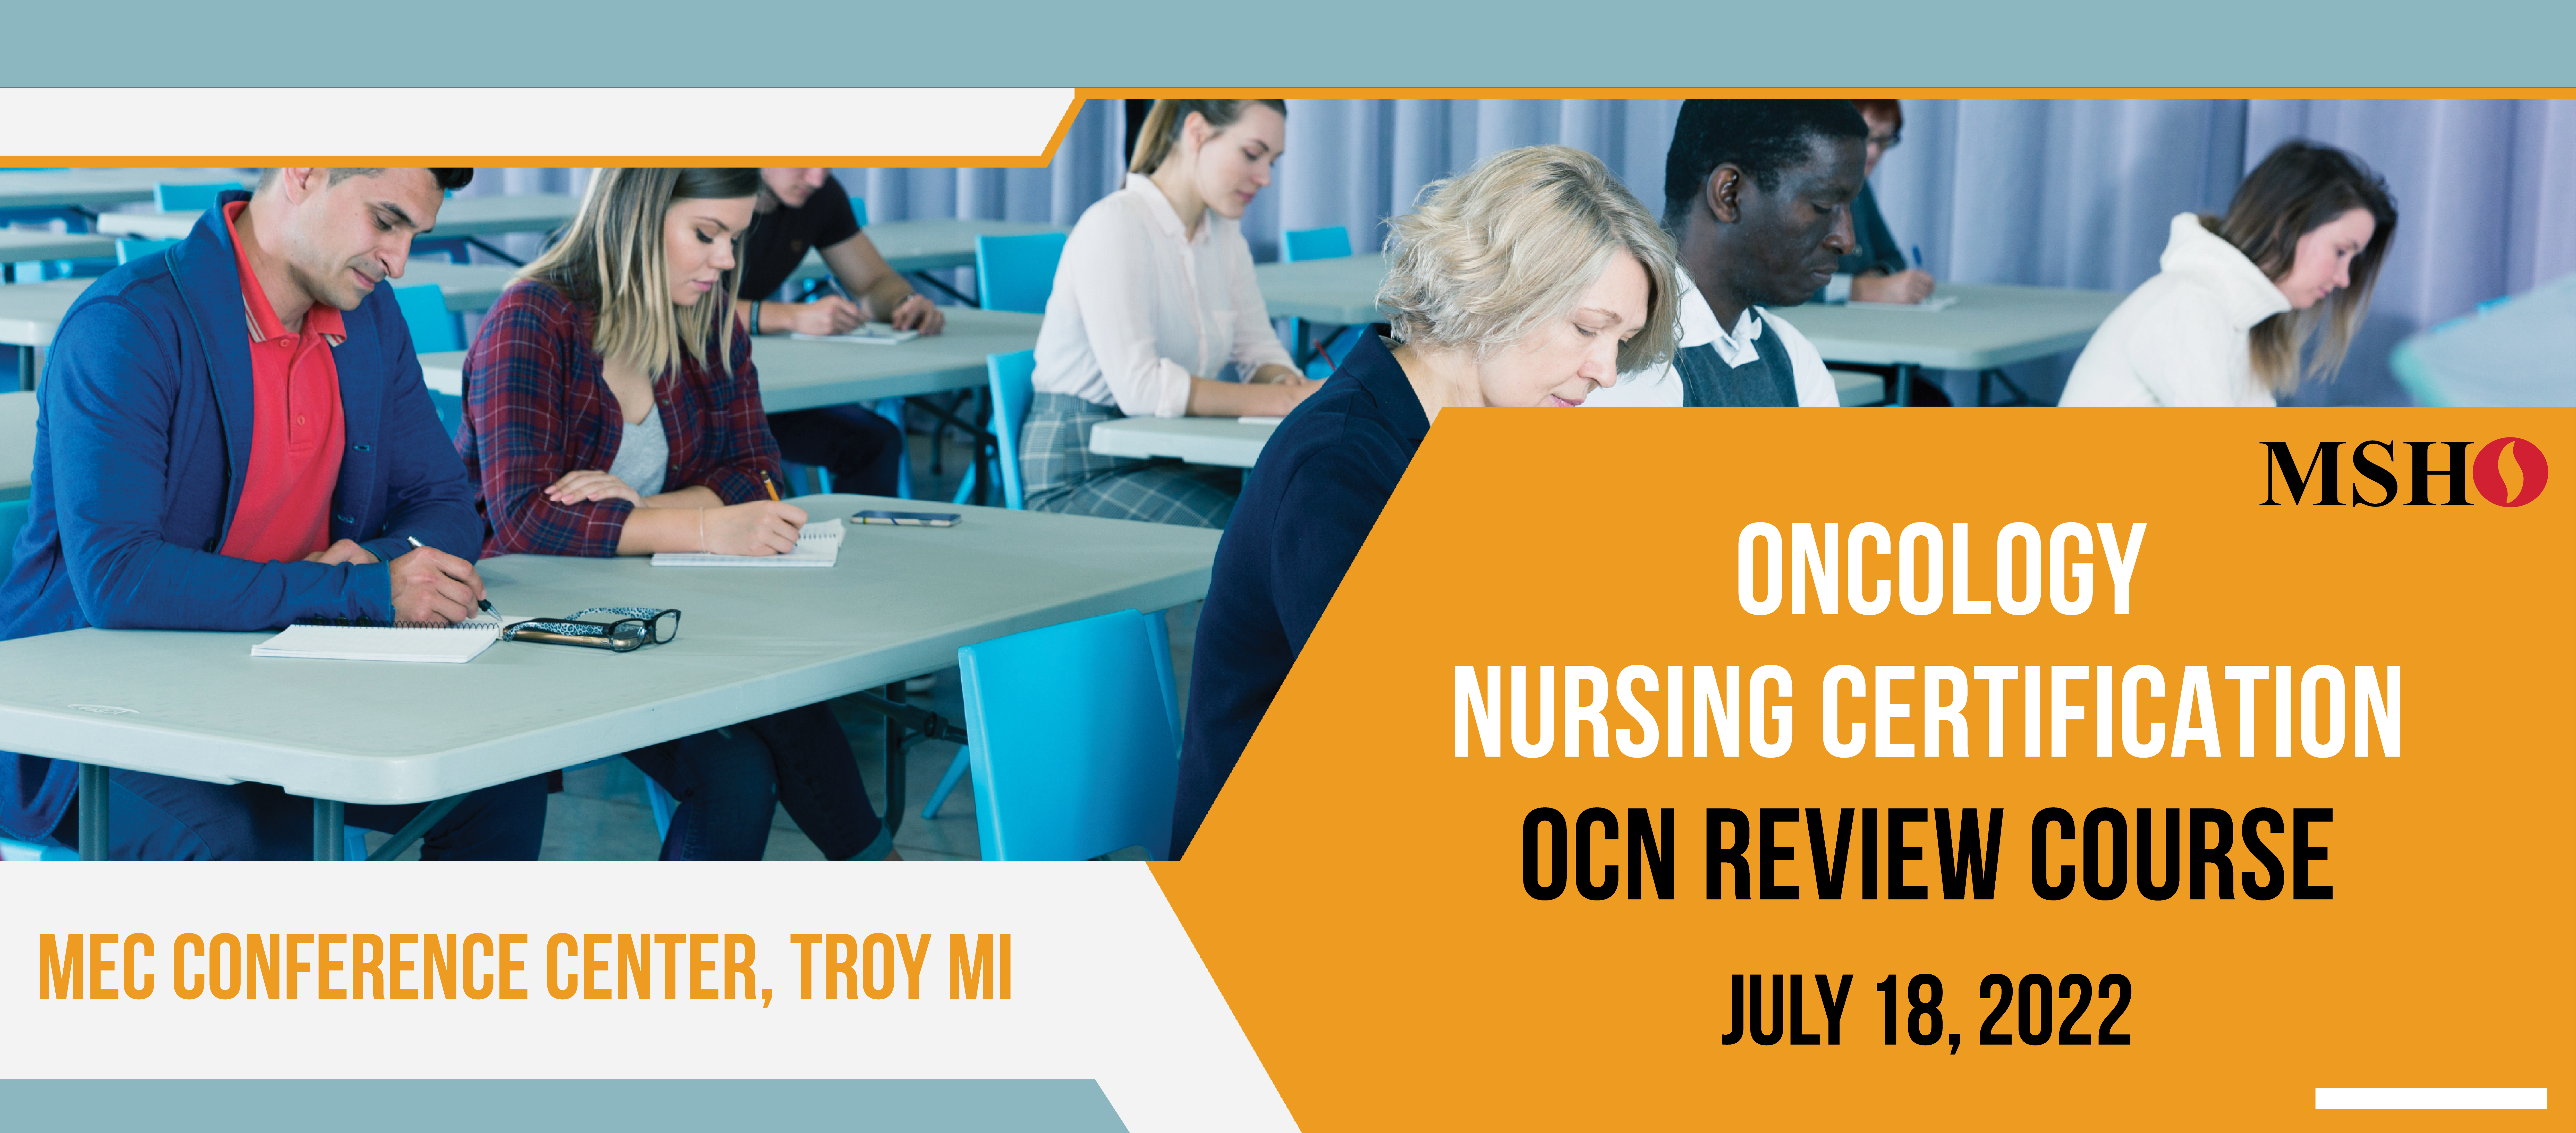 Oncology Nursing Certification OCN Review Course